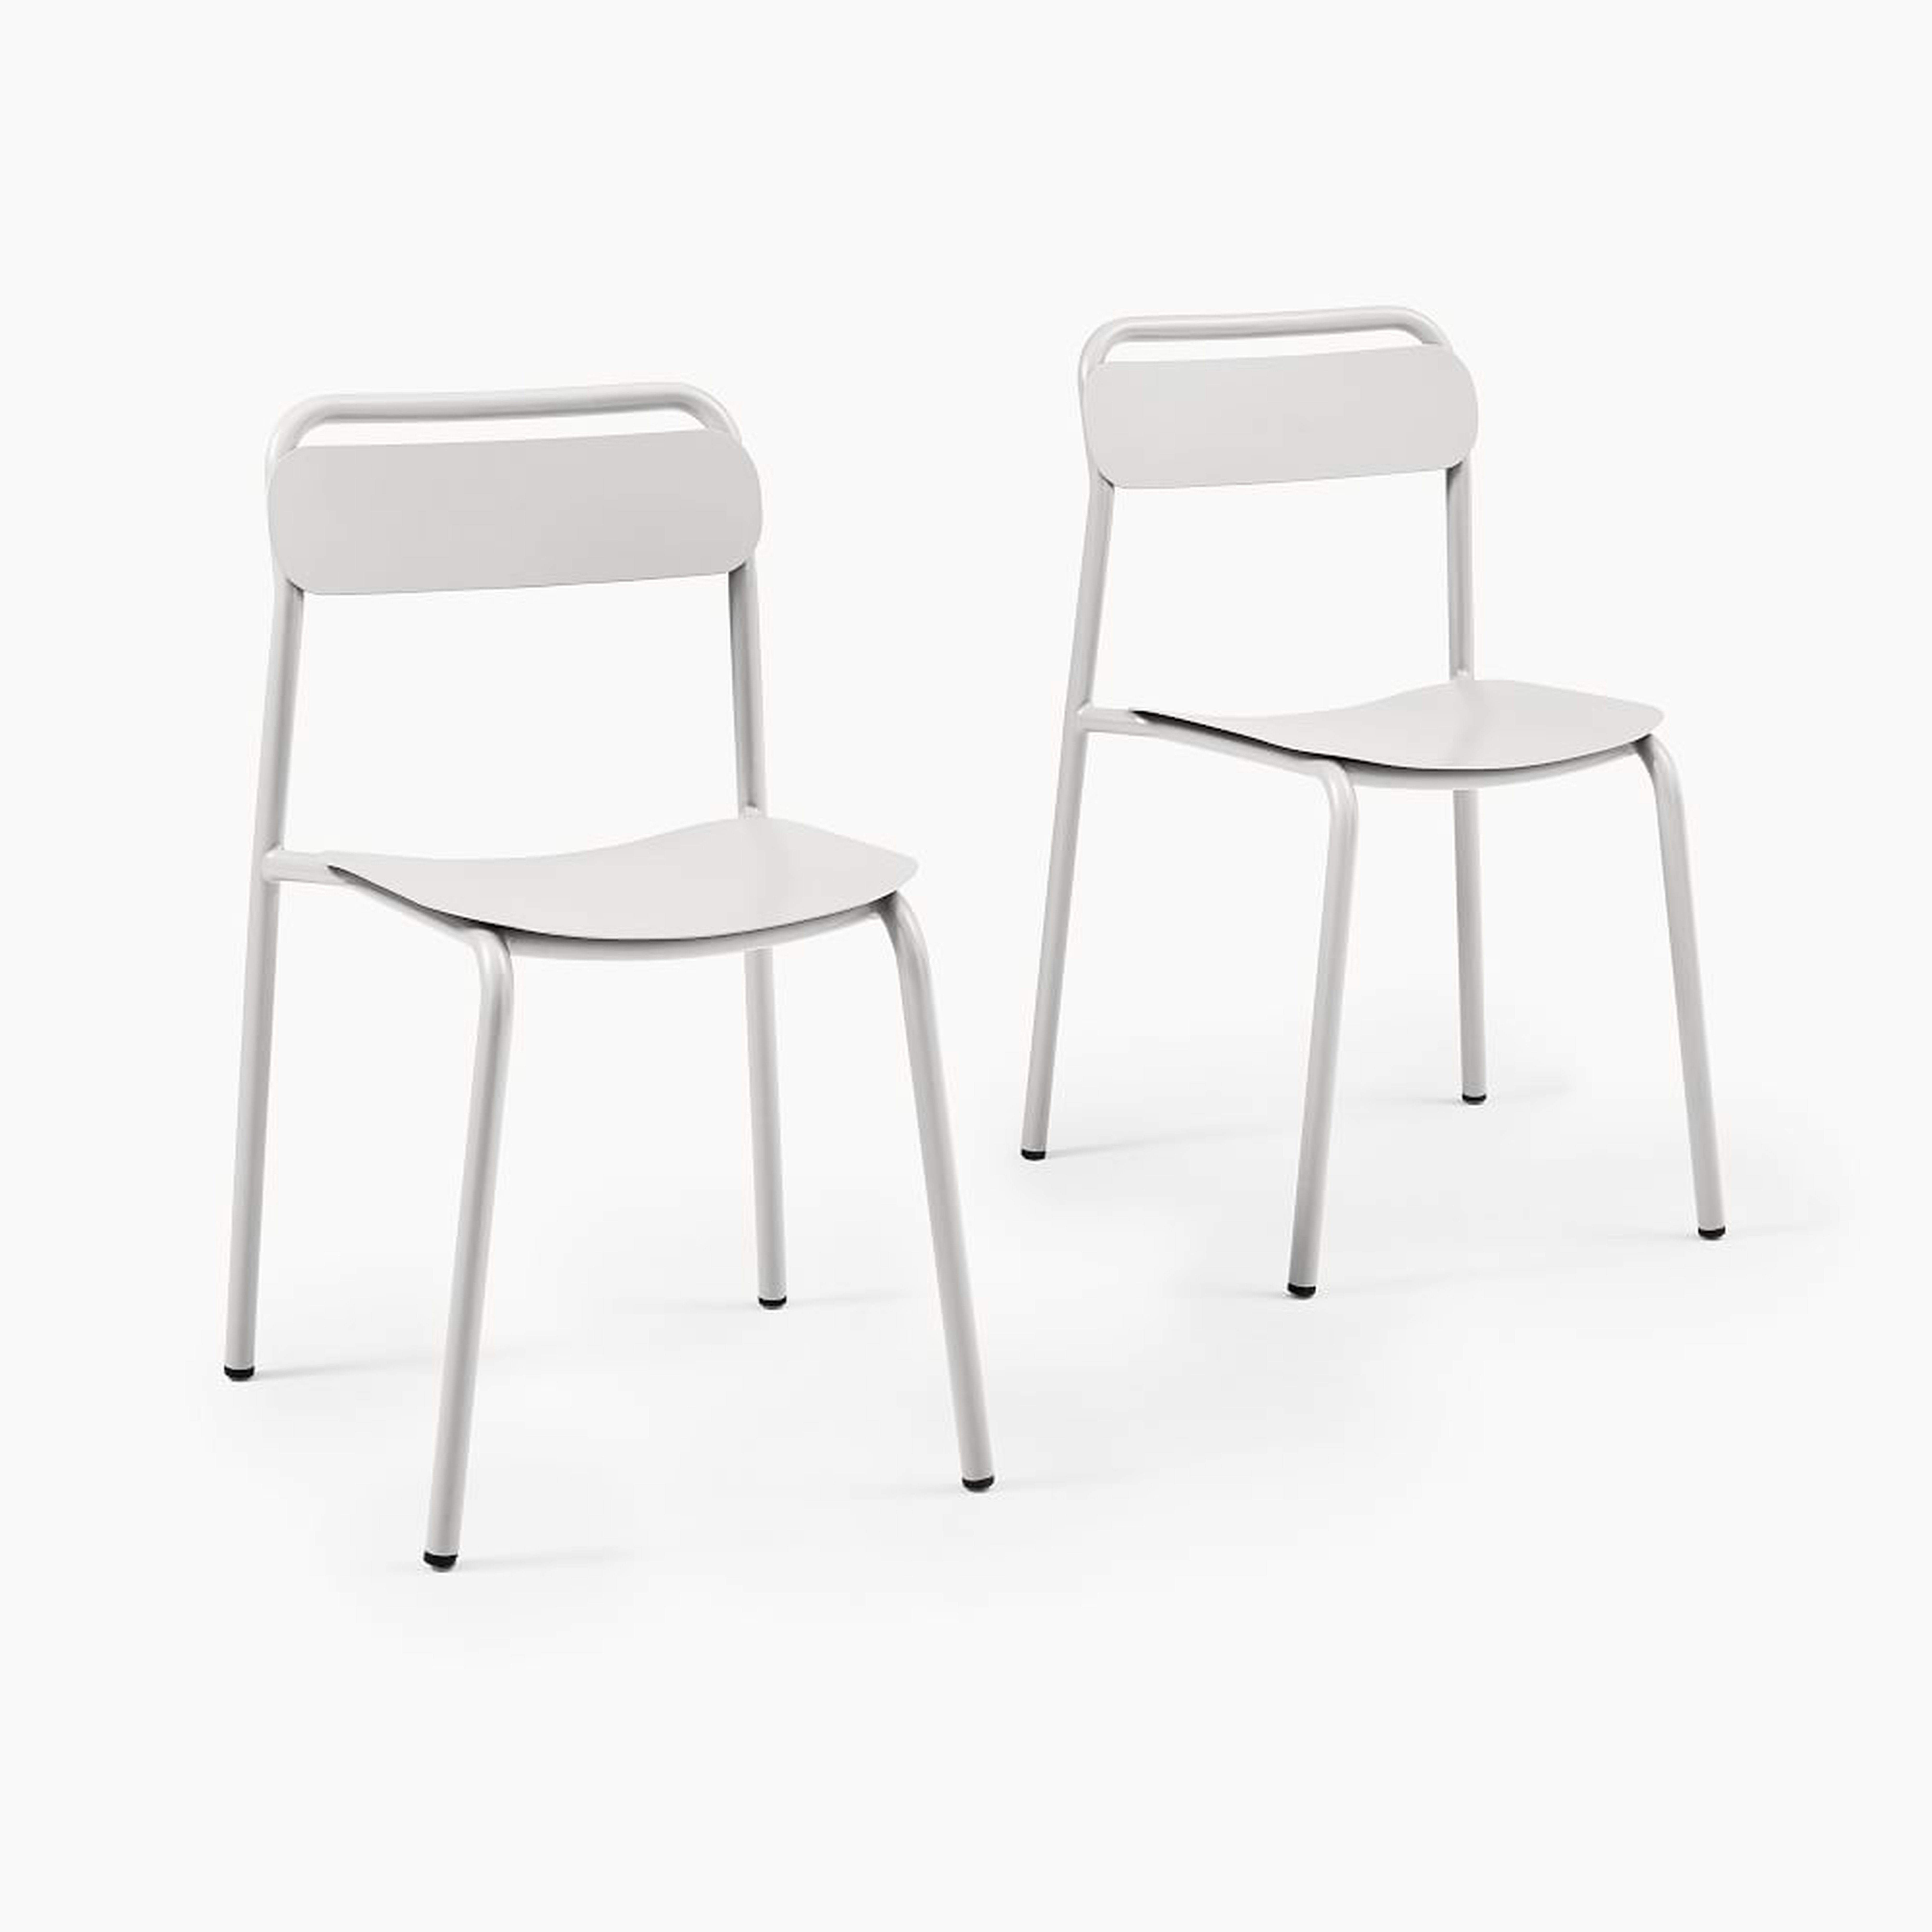 Outdoor Metal Stacking Dining Chairs, Haze, Set of 2 - West Elm